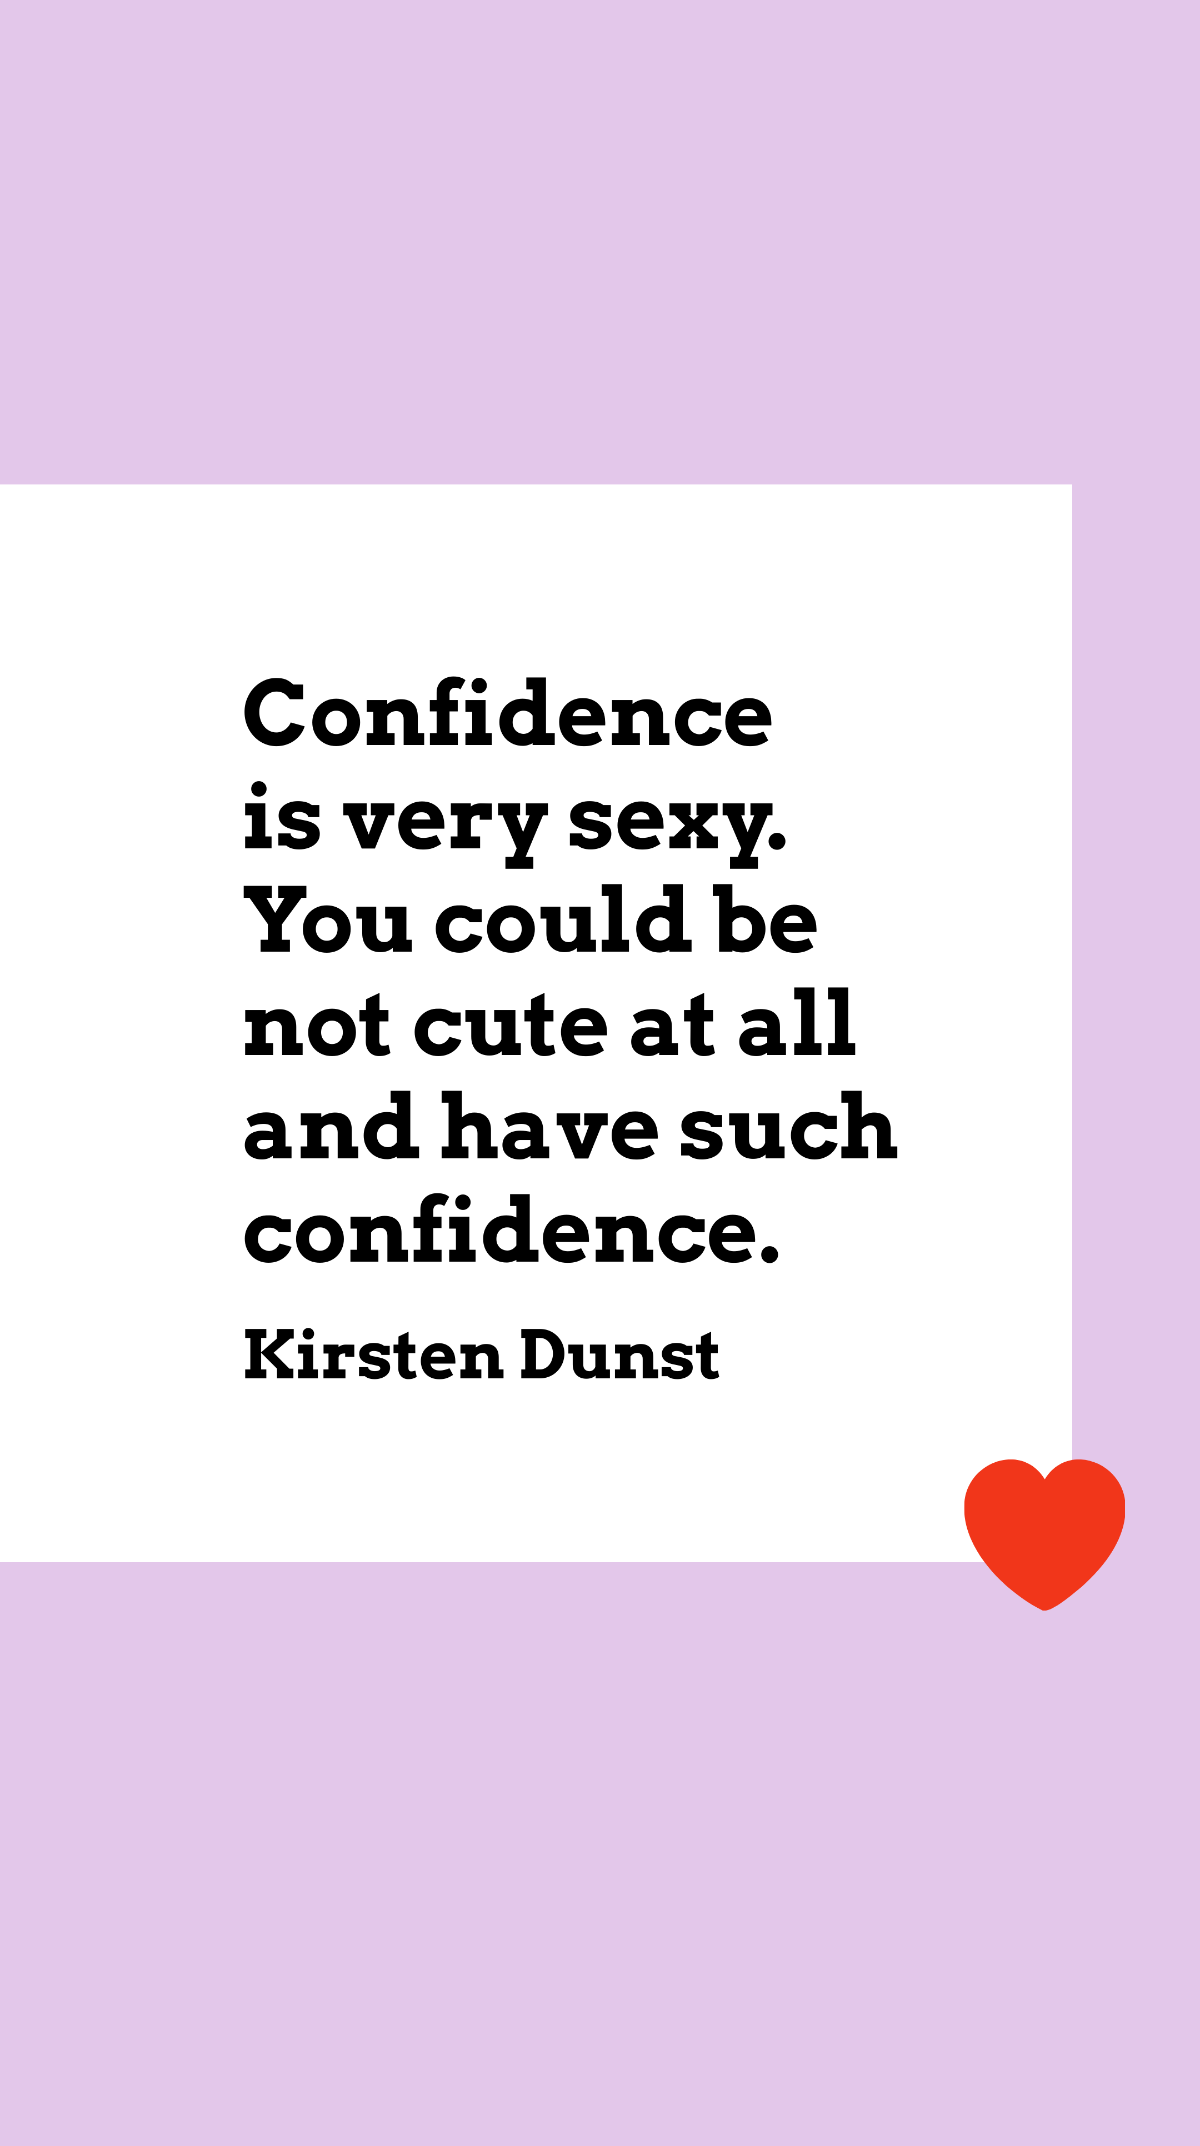 Kirsten Dunst - Confidence is very sexy. You could be not cute at all and have such confidence.